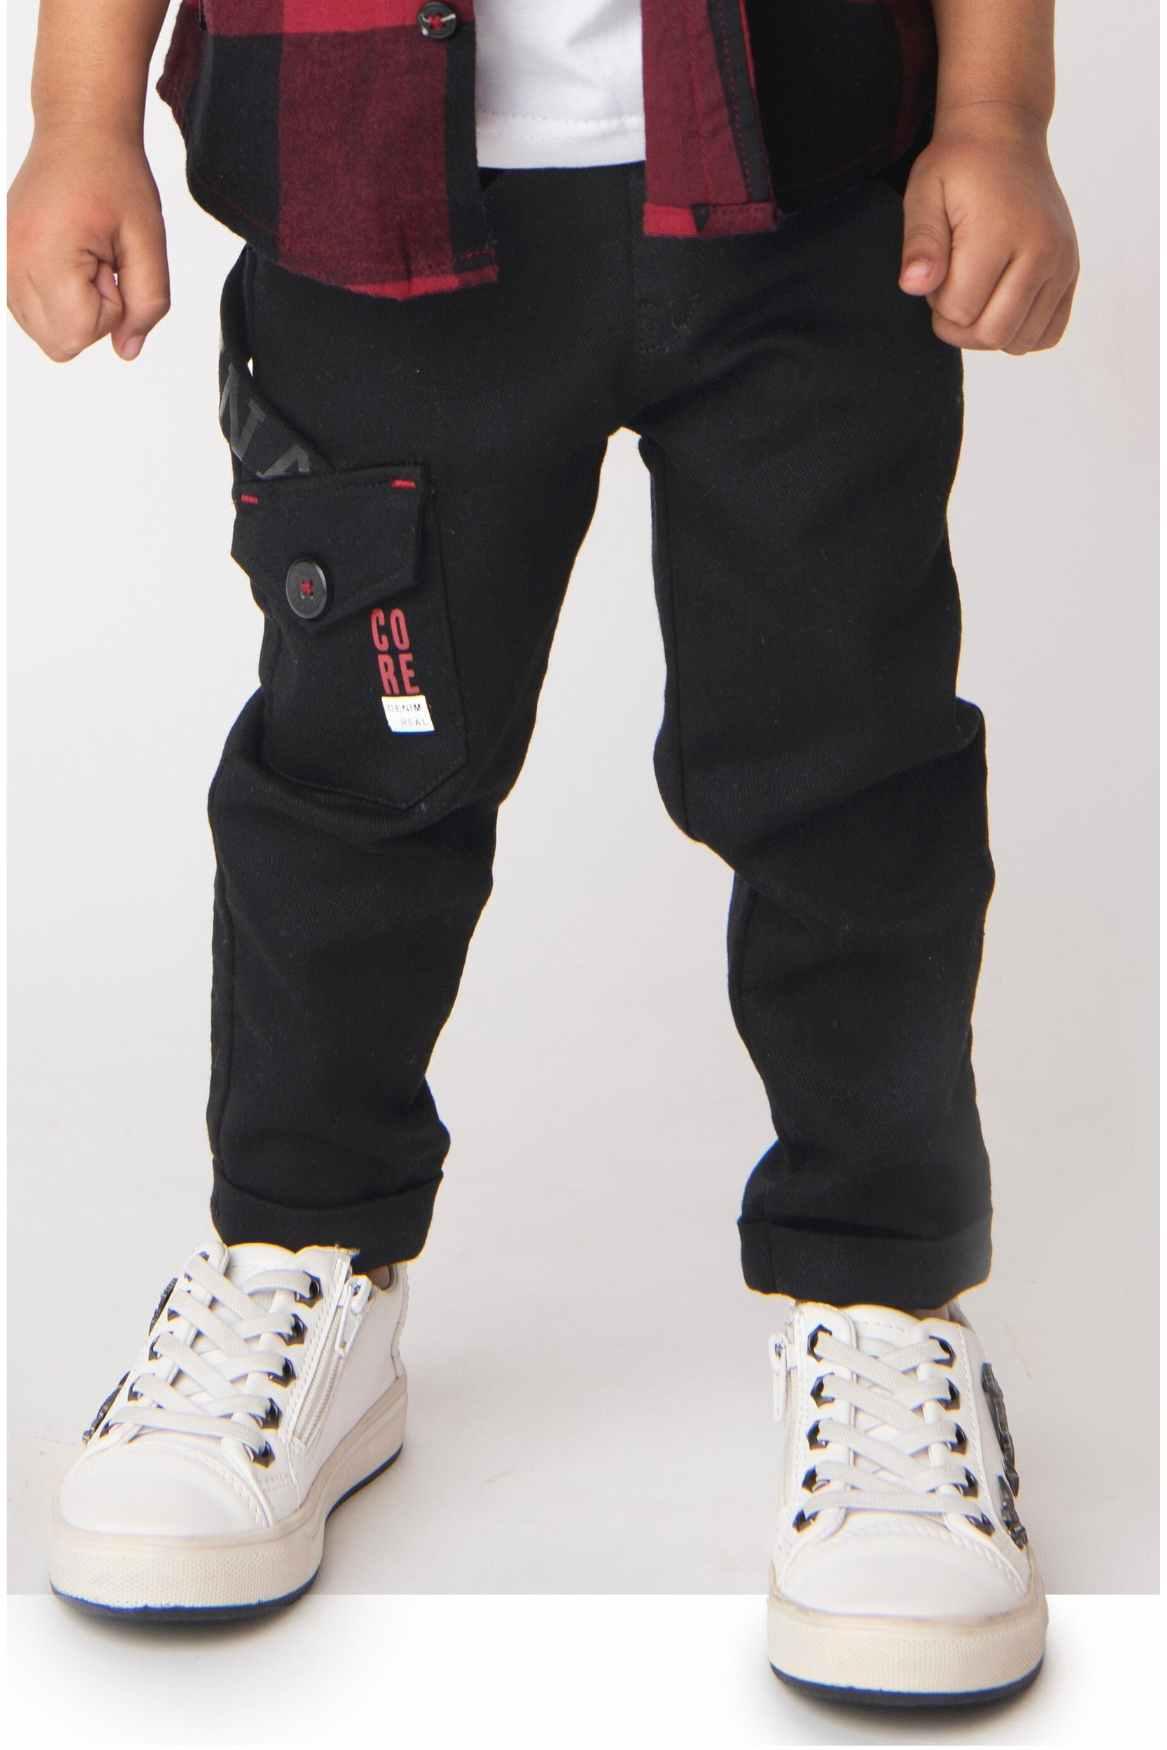 White Mickey Mouse T-Shirt With Red Checked Overshirt And Black Pant Set For Boys - Lagorii Kids